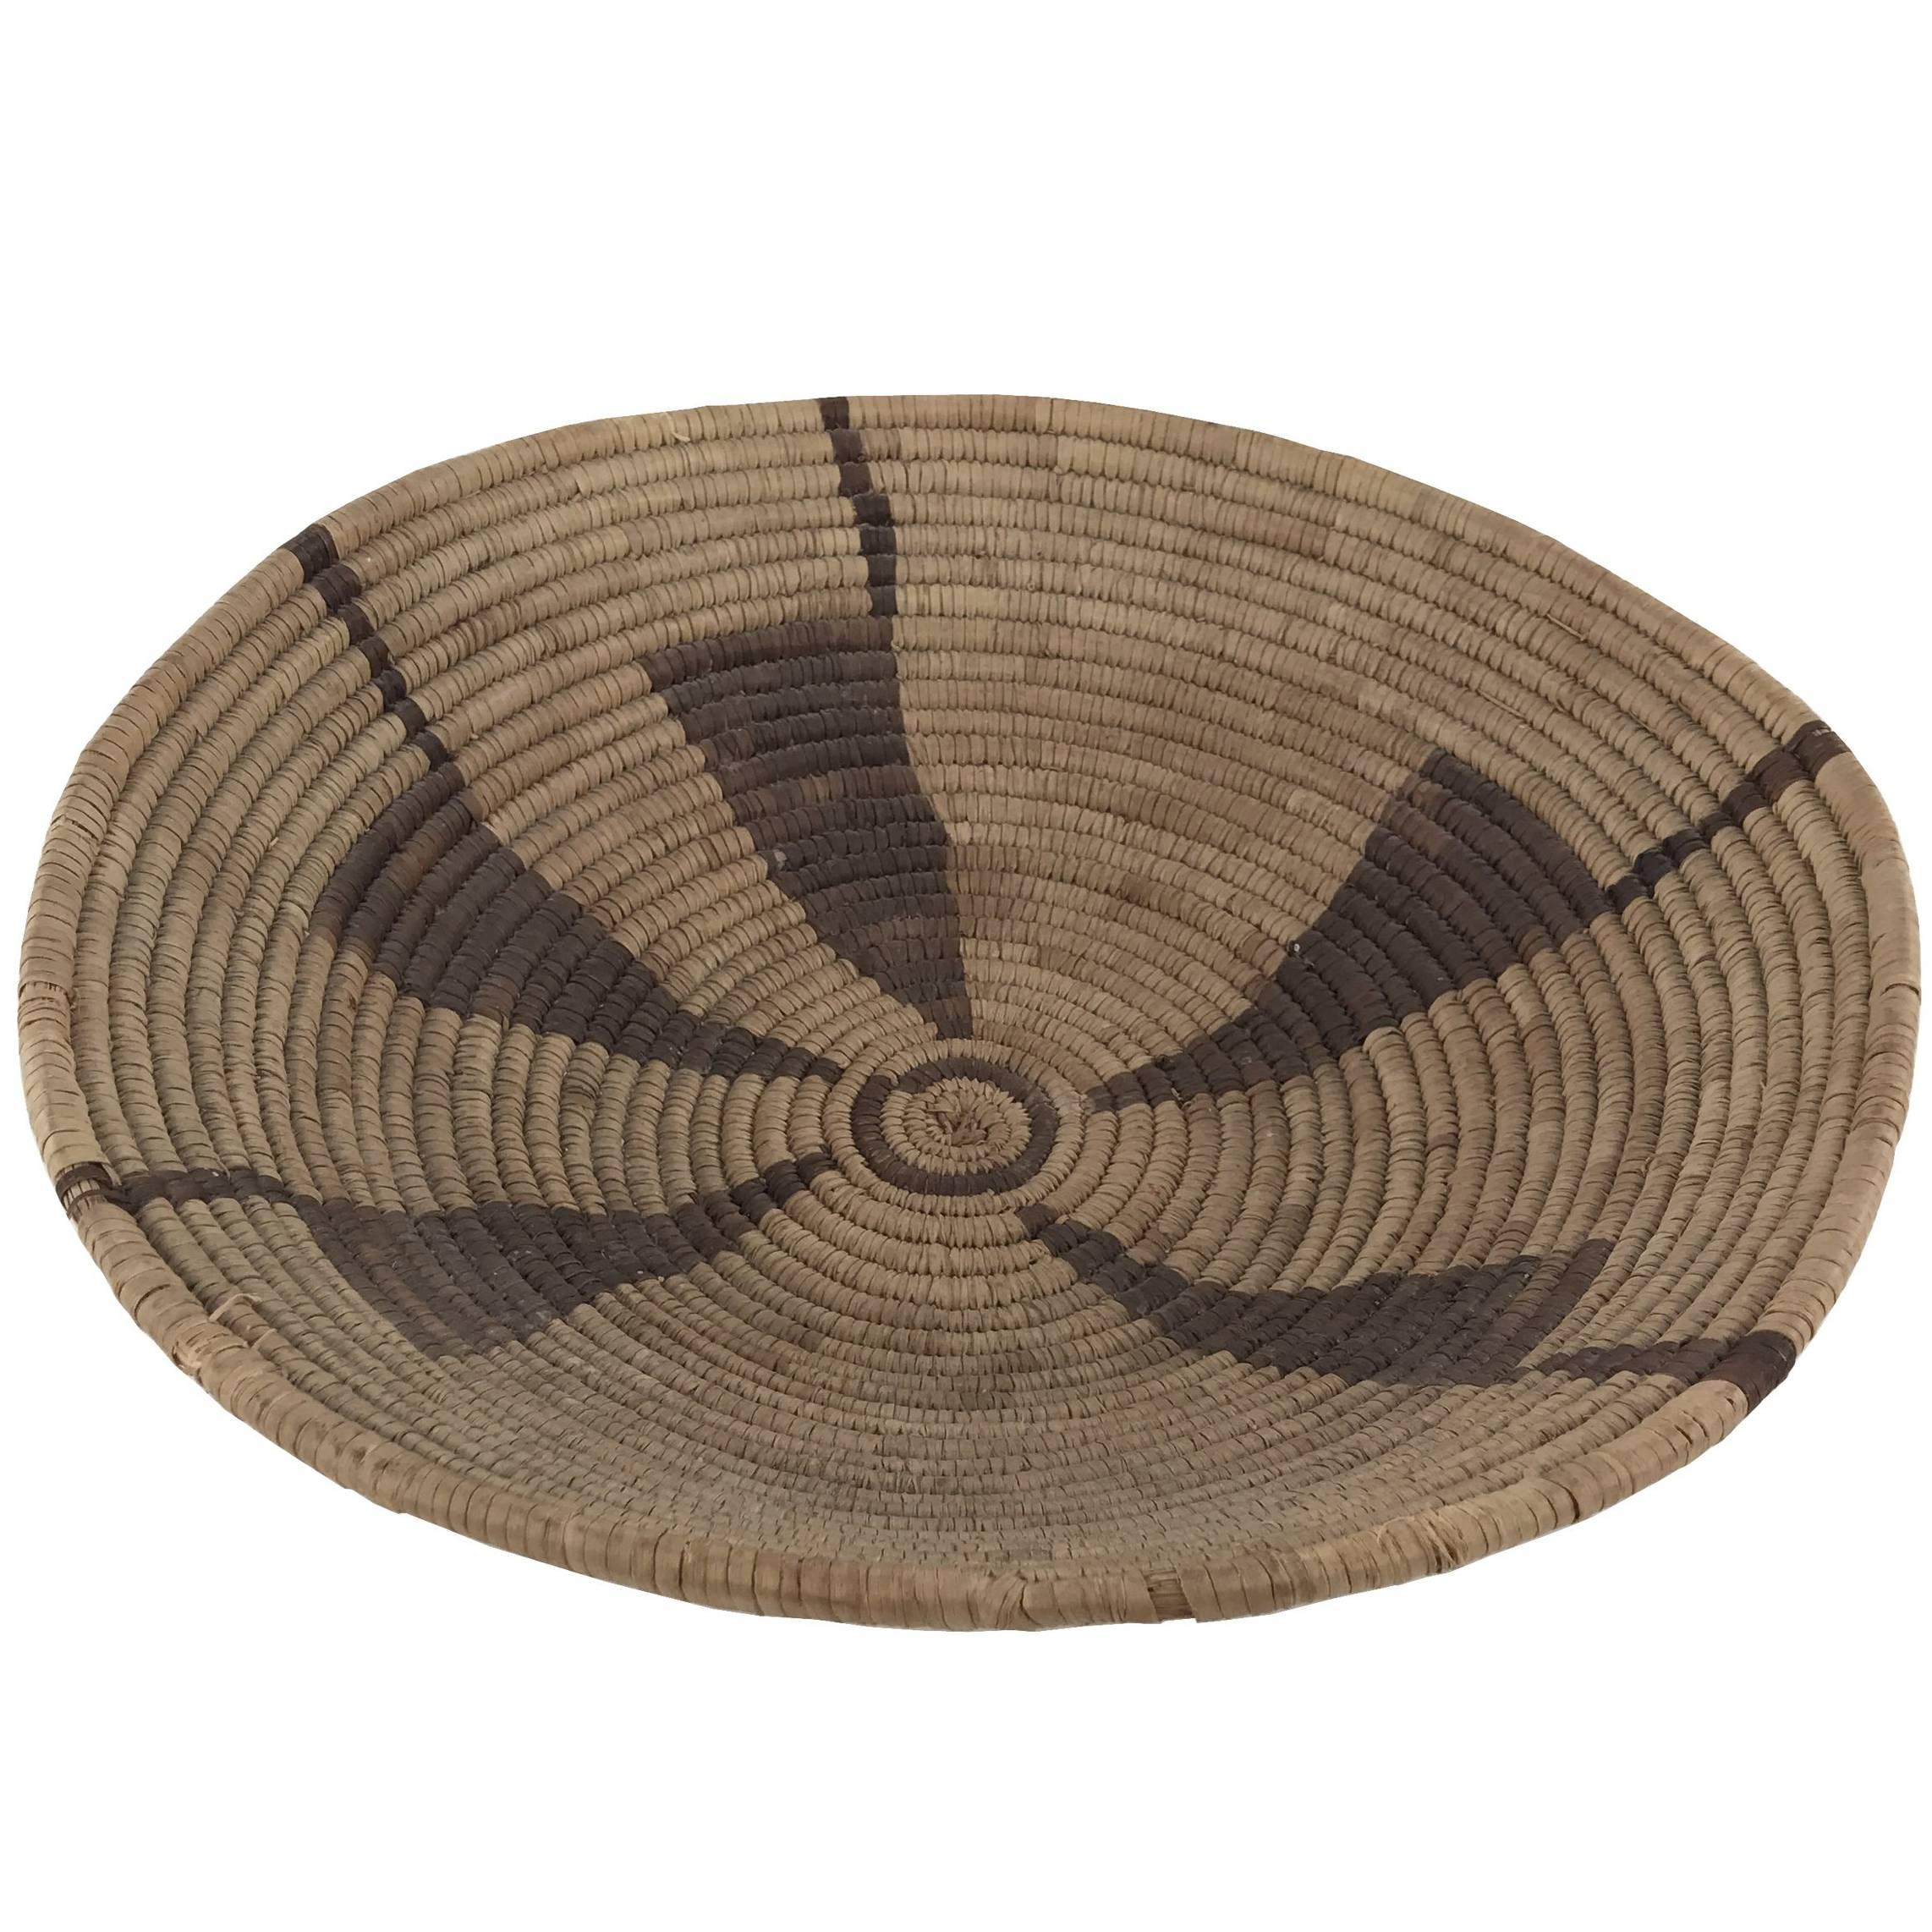 South West Native American Twined Shallow Bowl or Tray